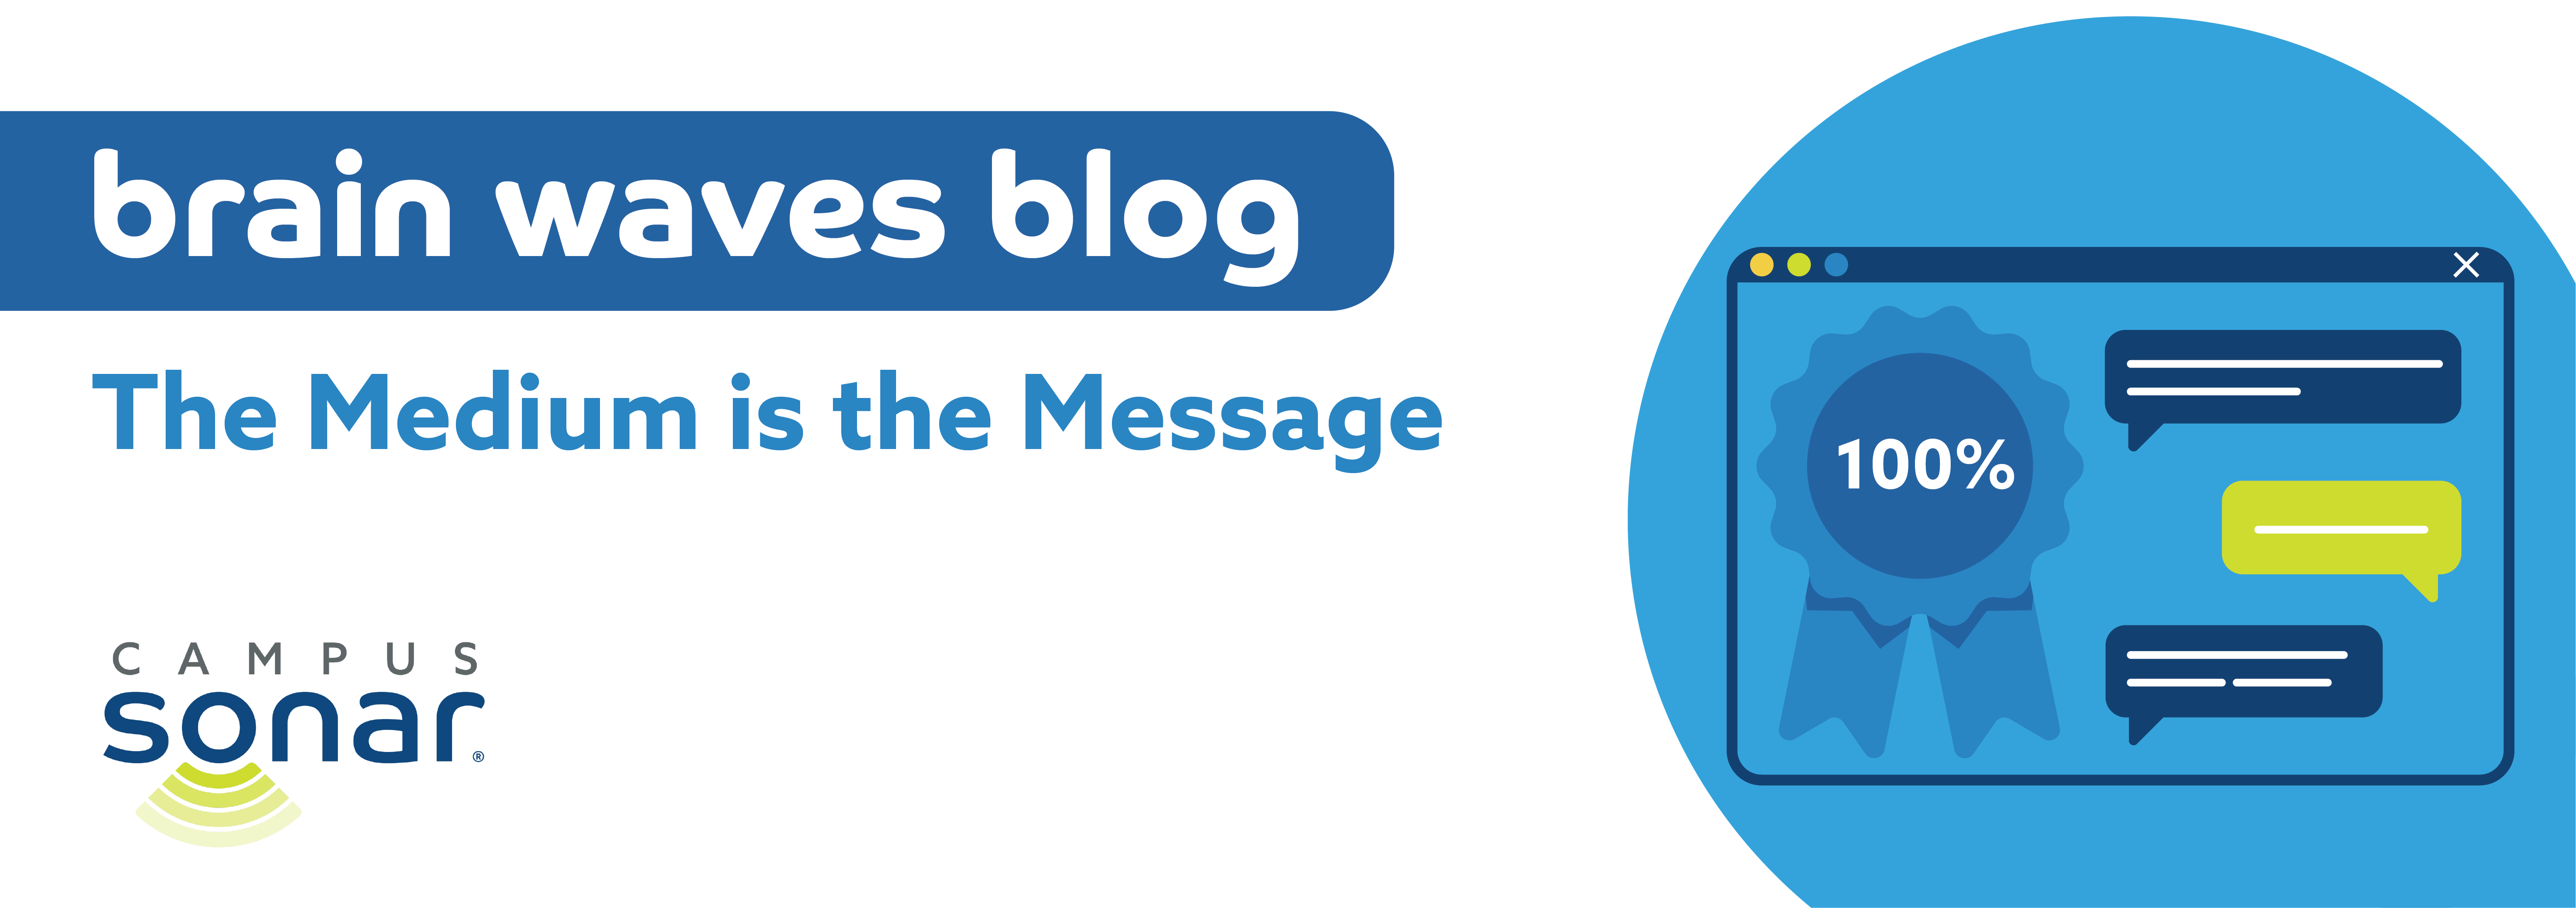 Brain Waves Blog: The Medium Is the Message